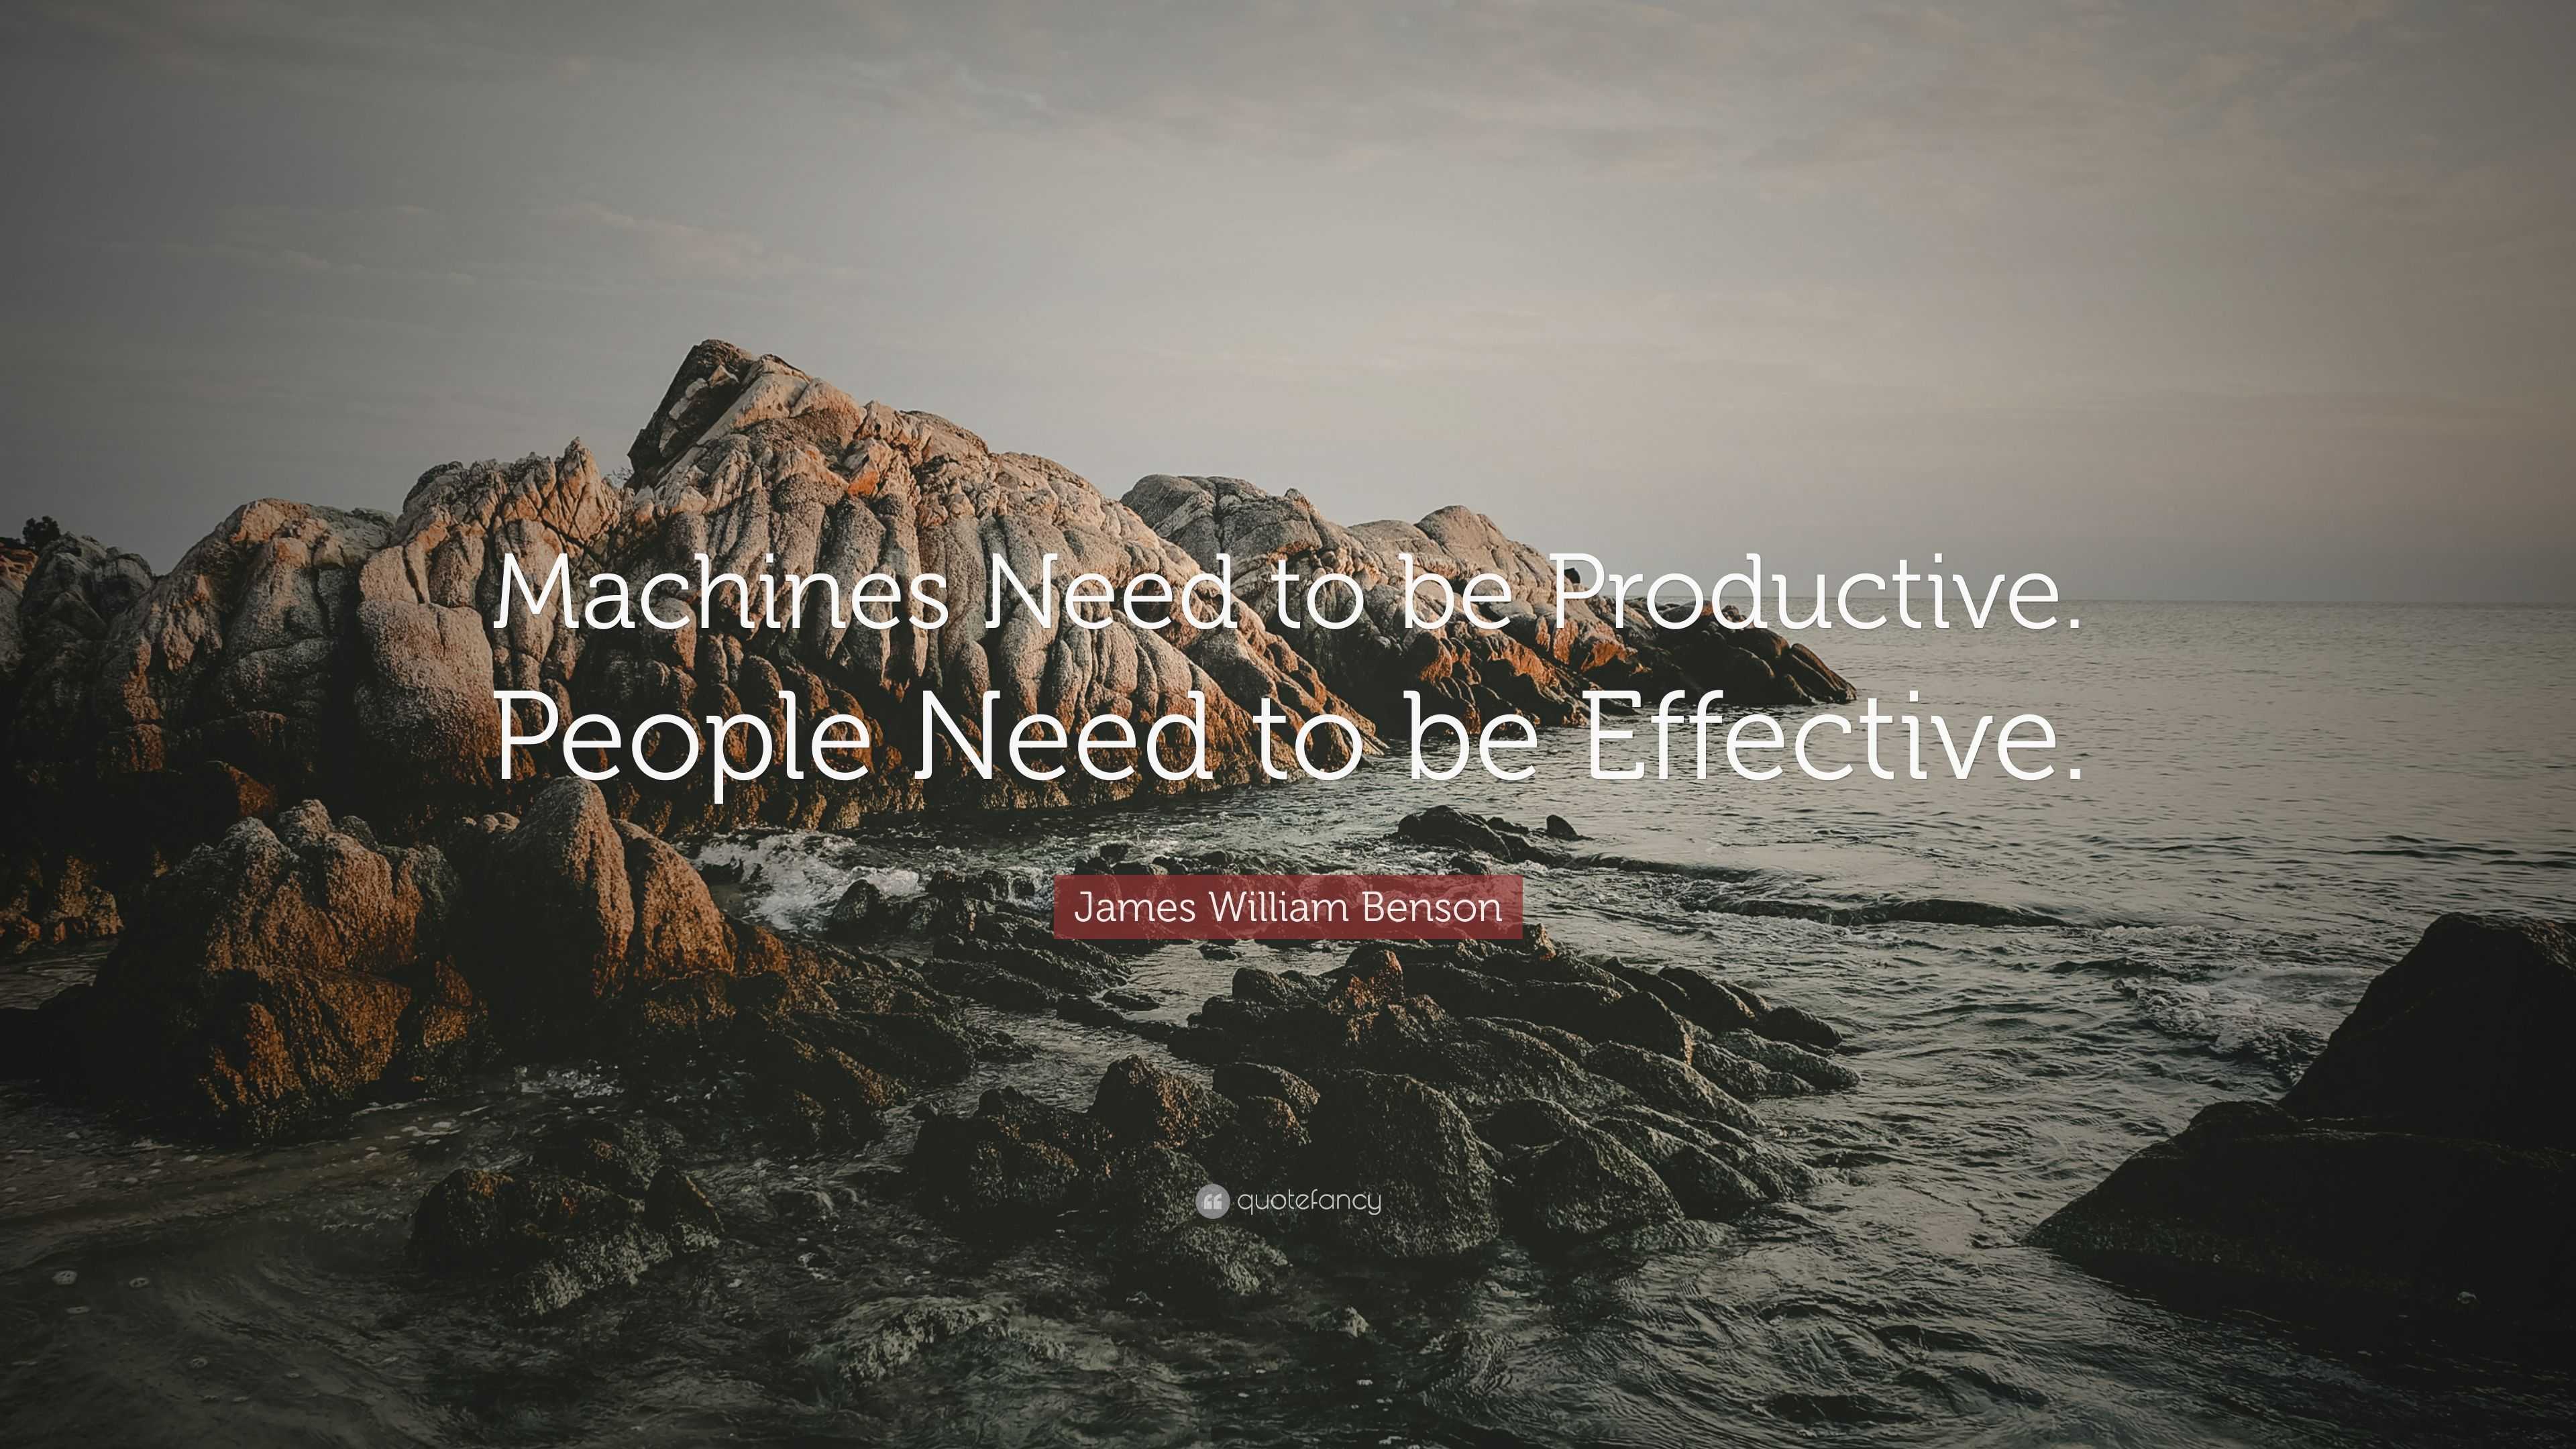 James William Benson Quote: “Machines Need to be Productive